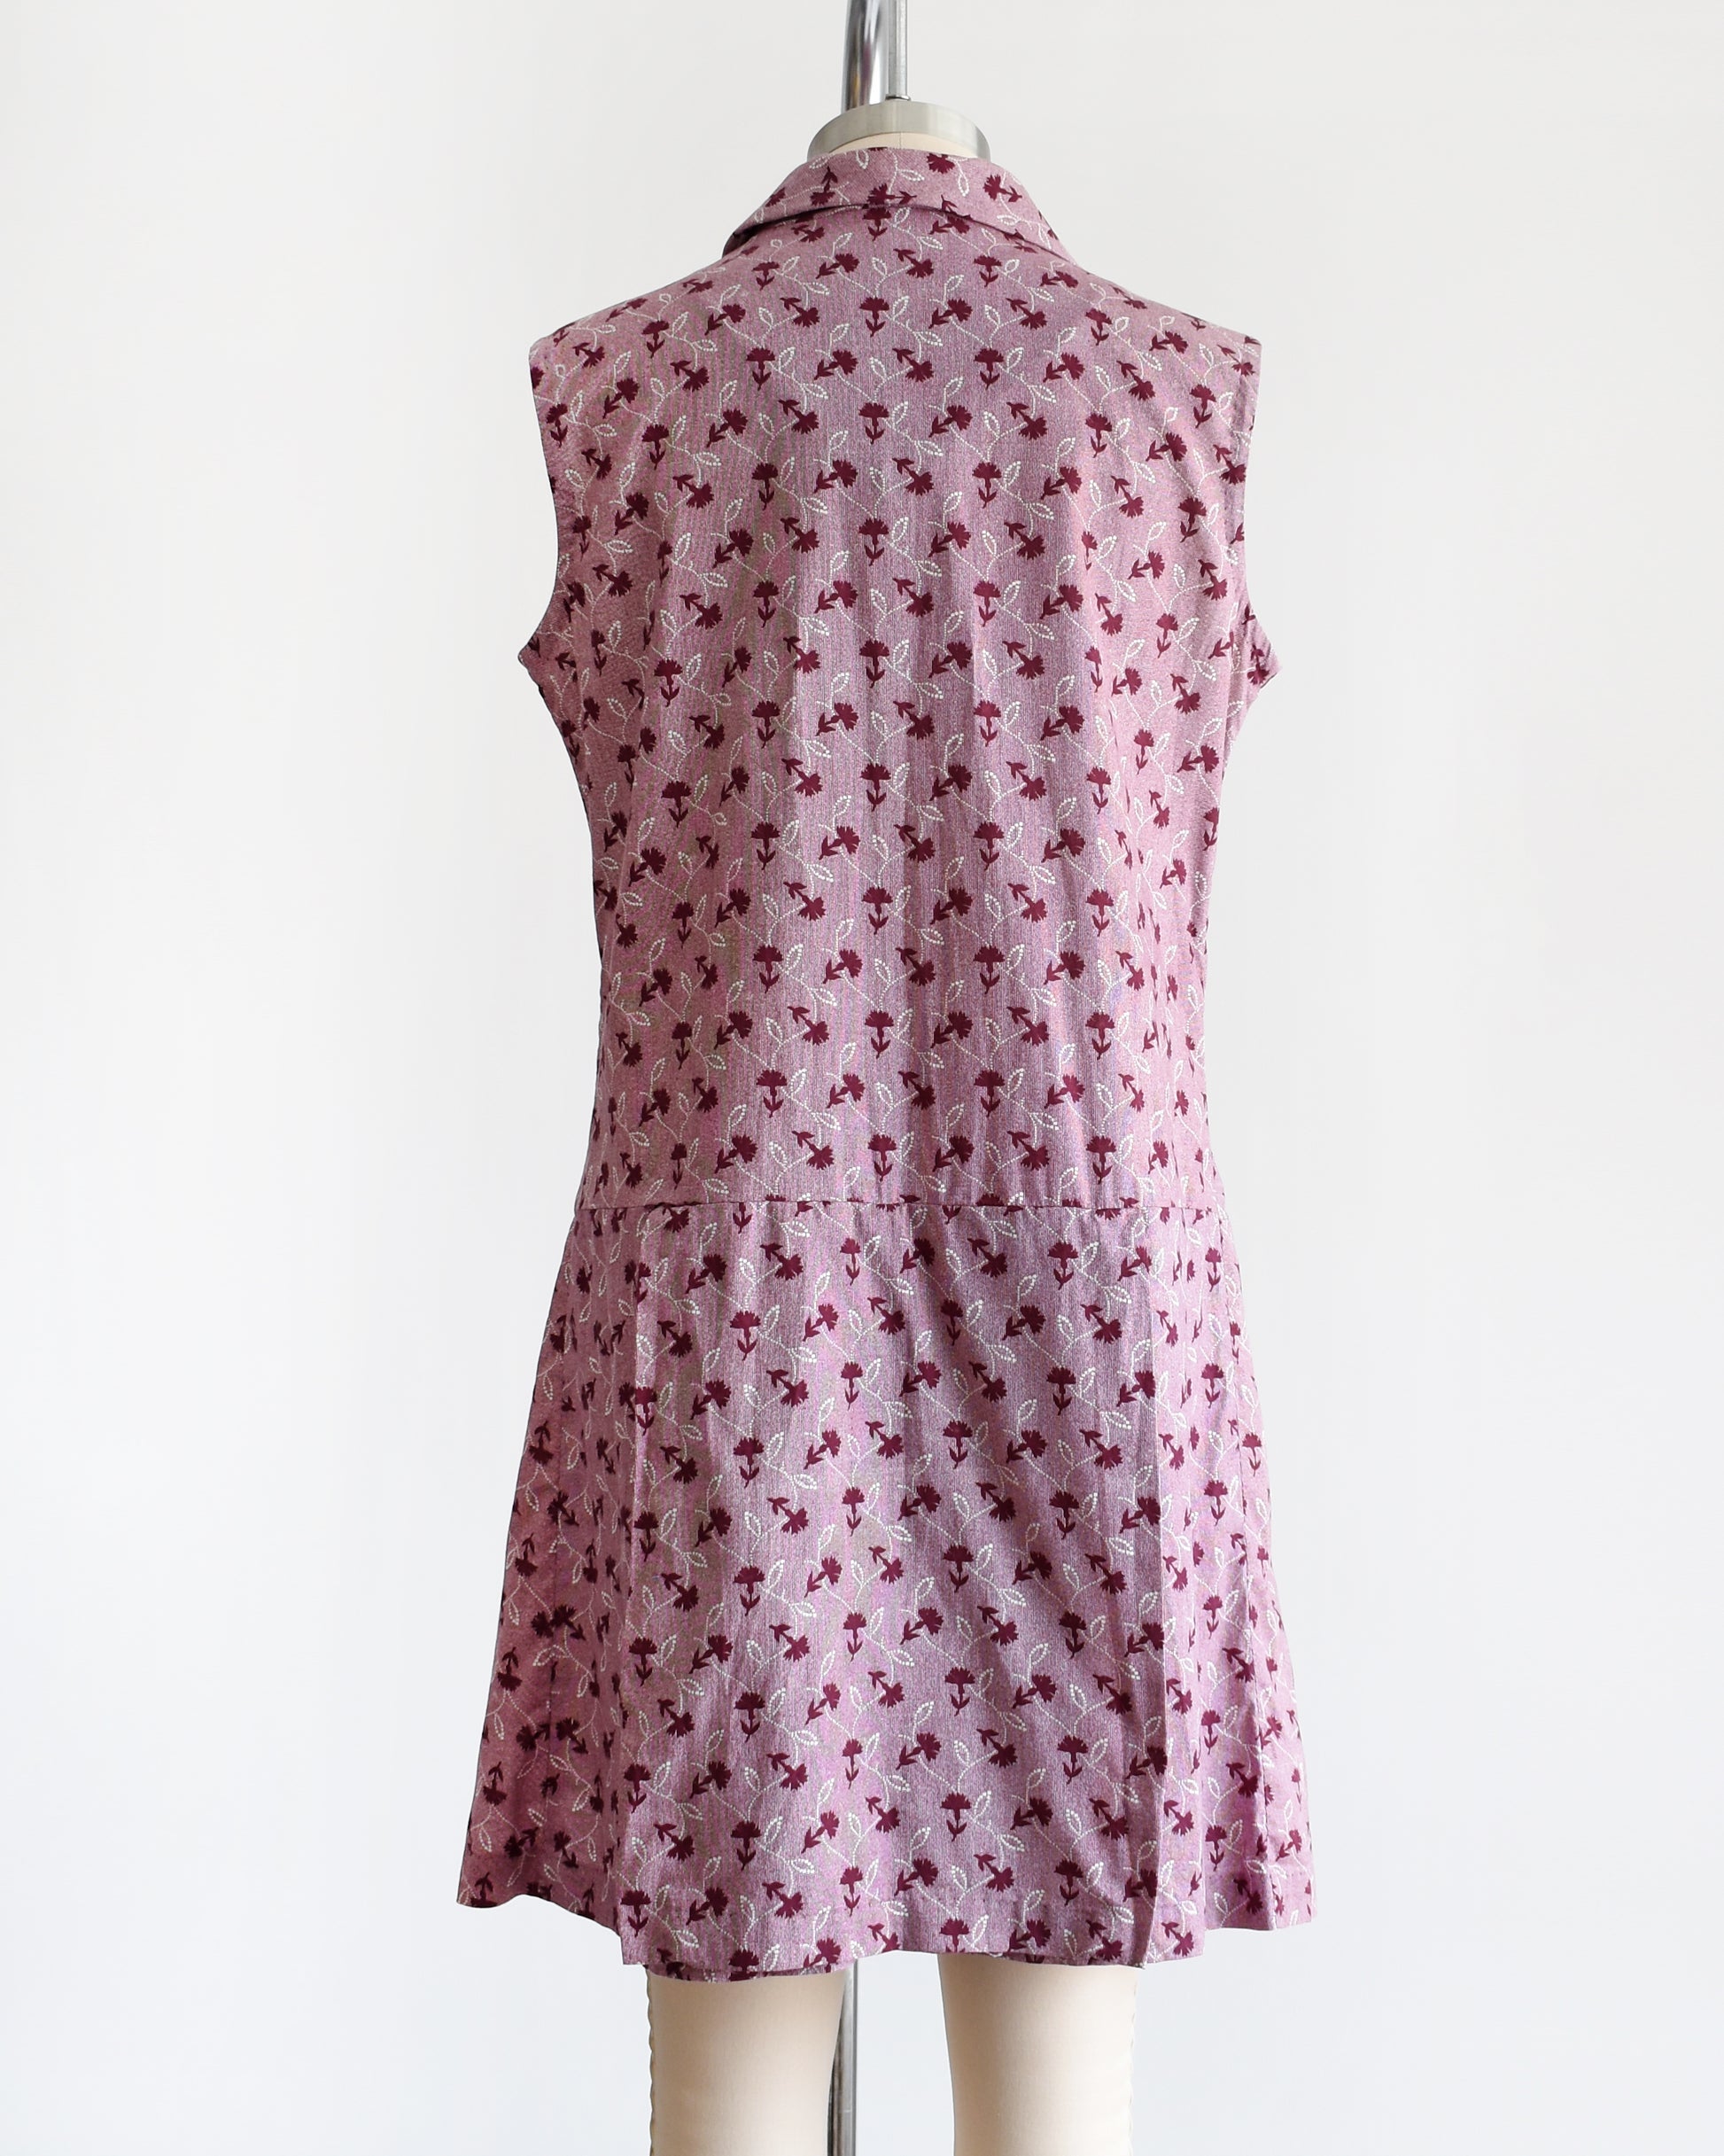 Back view of a Side view of a 1970s vintage romper features a cute purple and white floral print and collared neckline